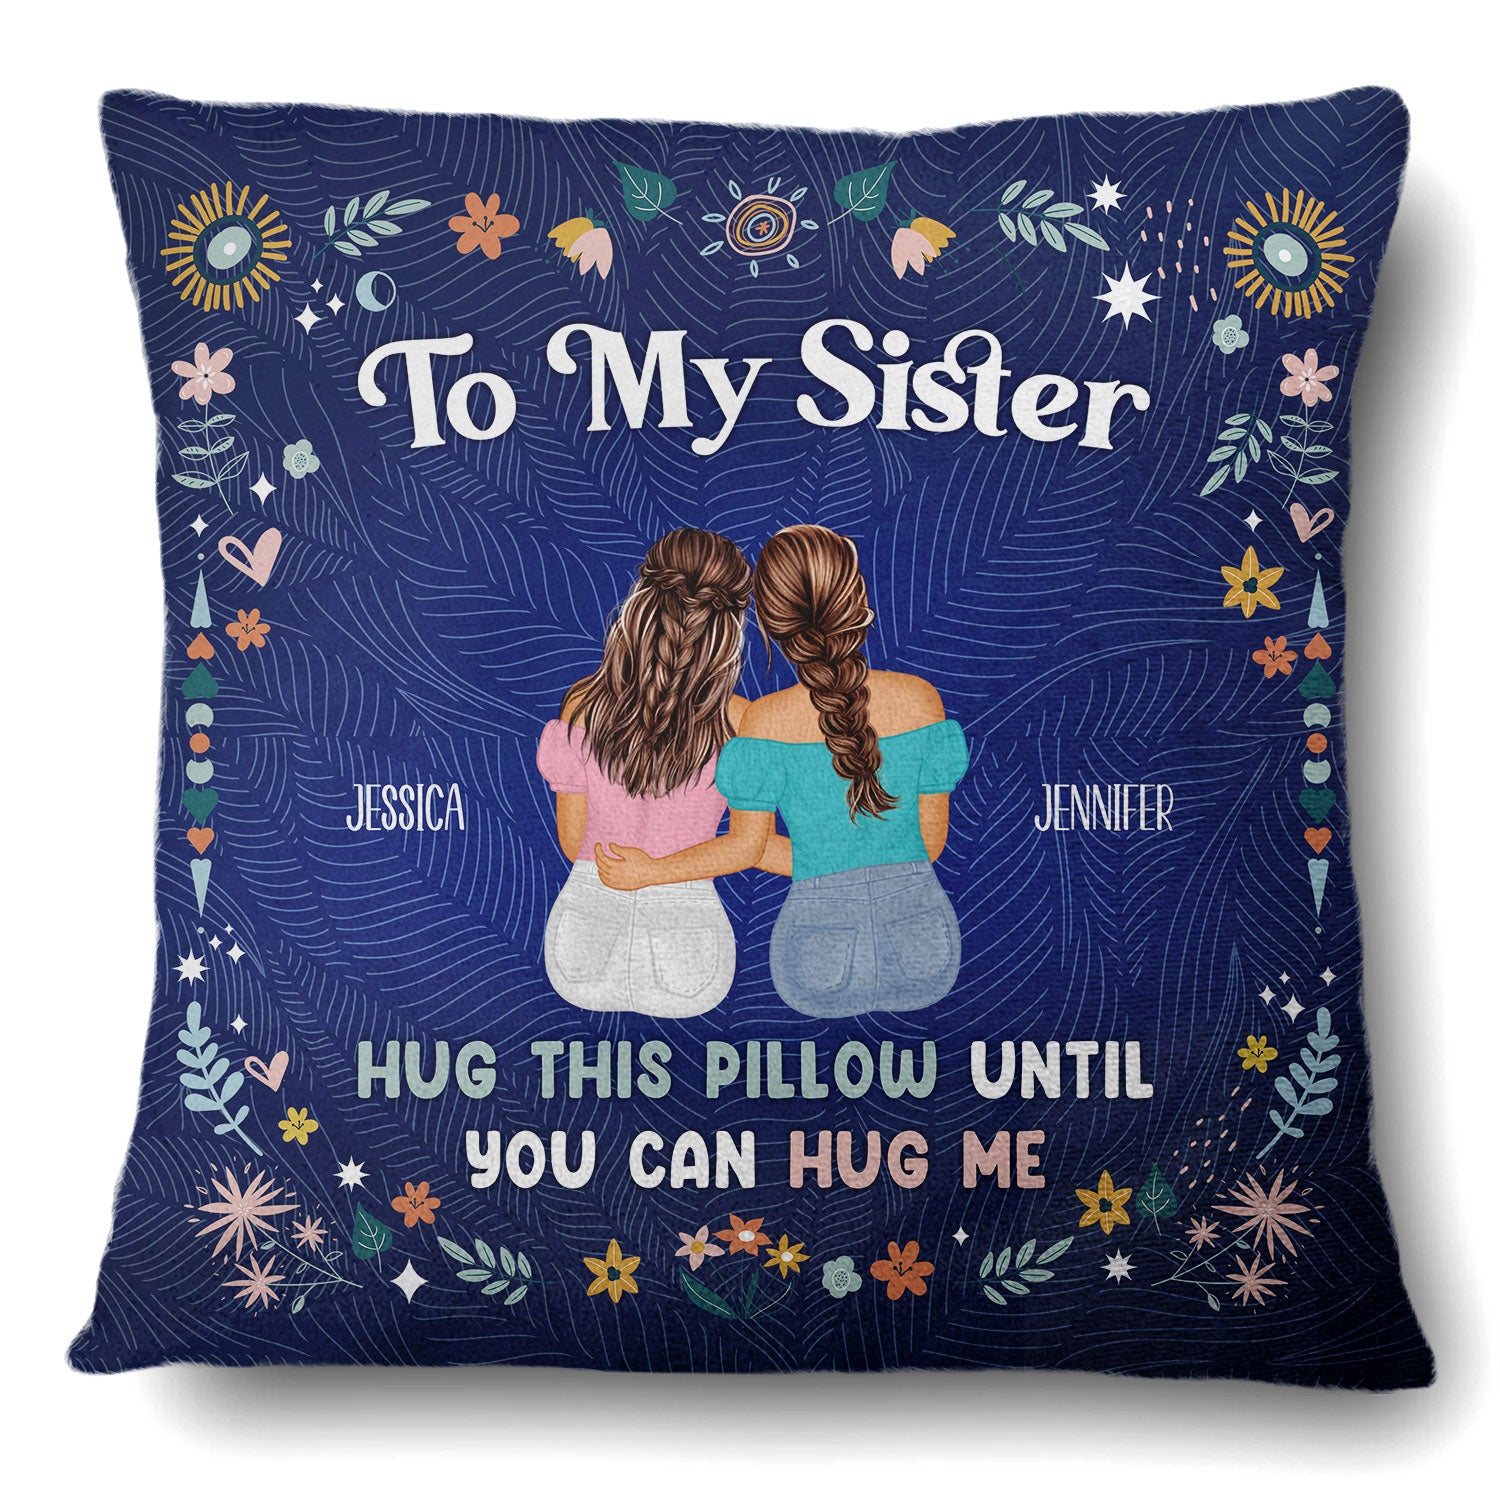 Until You Can Hug Me - Gift For Sisters And Best Friends - Personalized Pillow